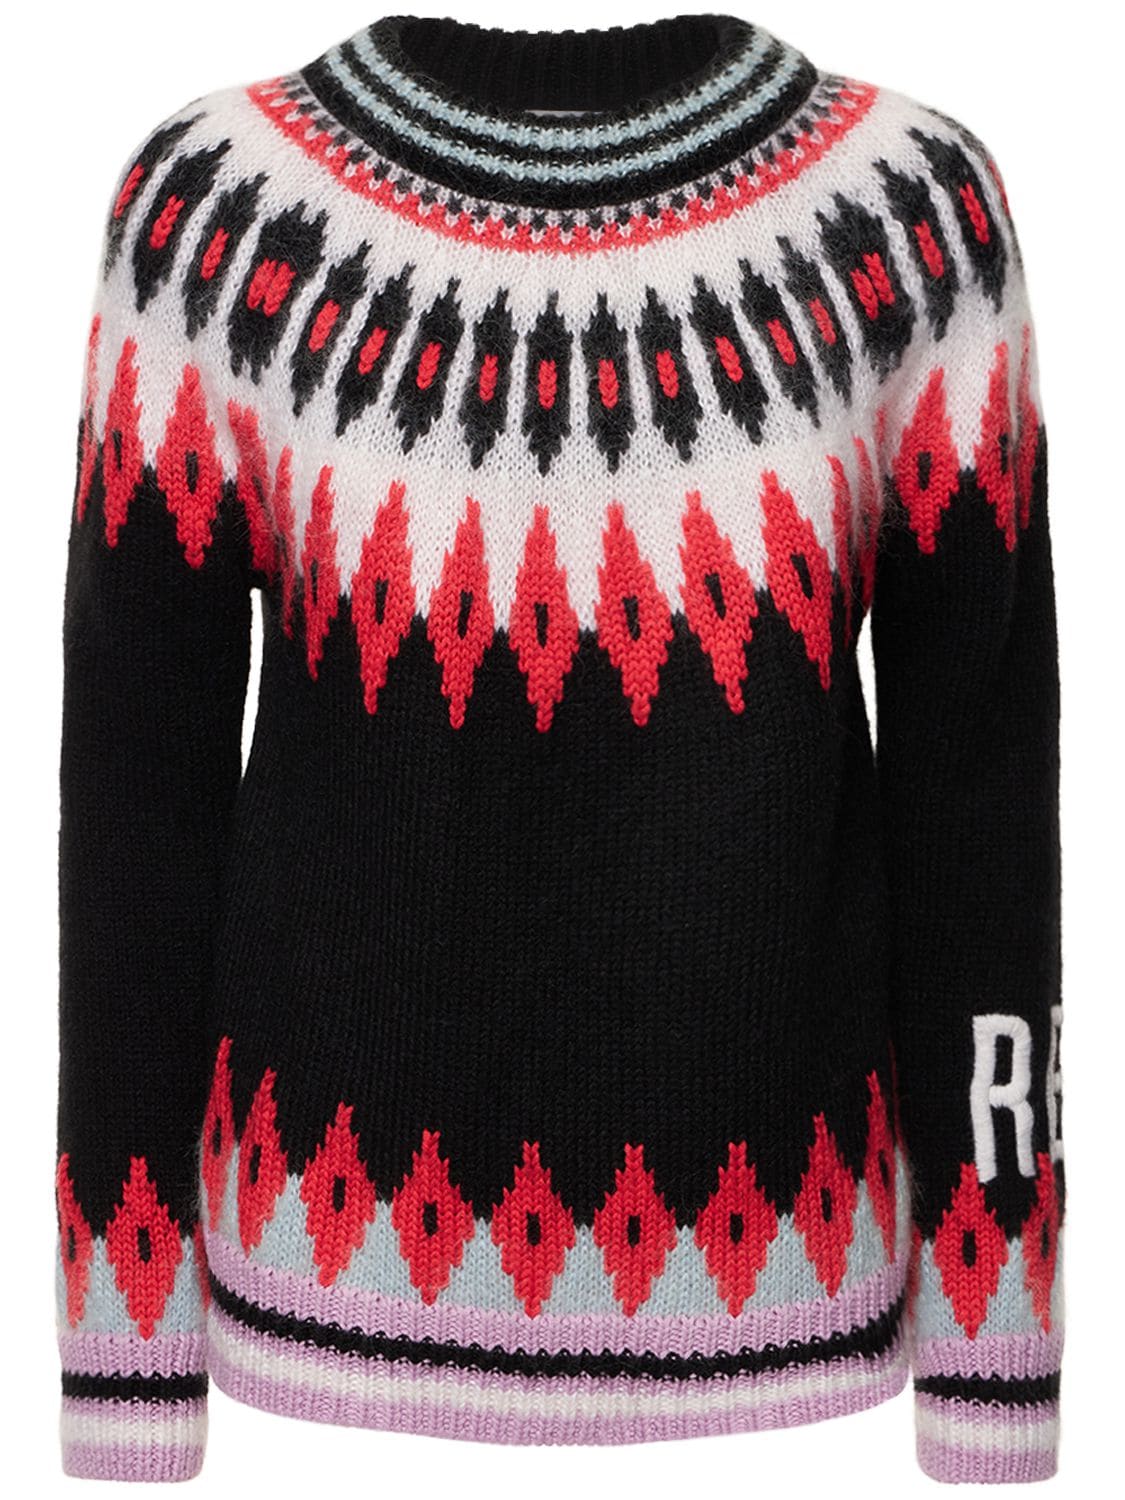 RED VALENTINO Mohair Blend Knit Sweater